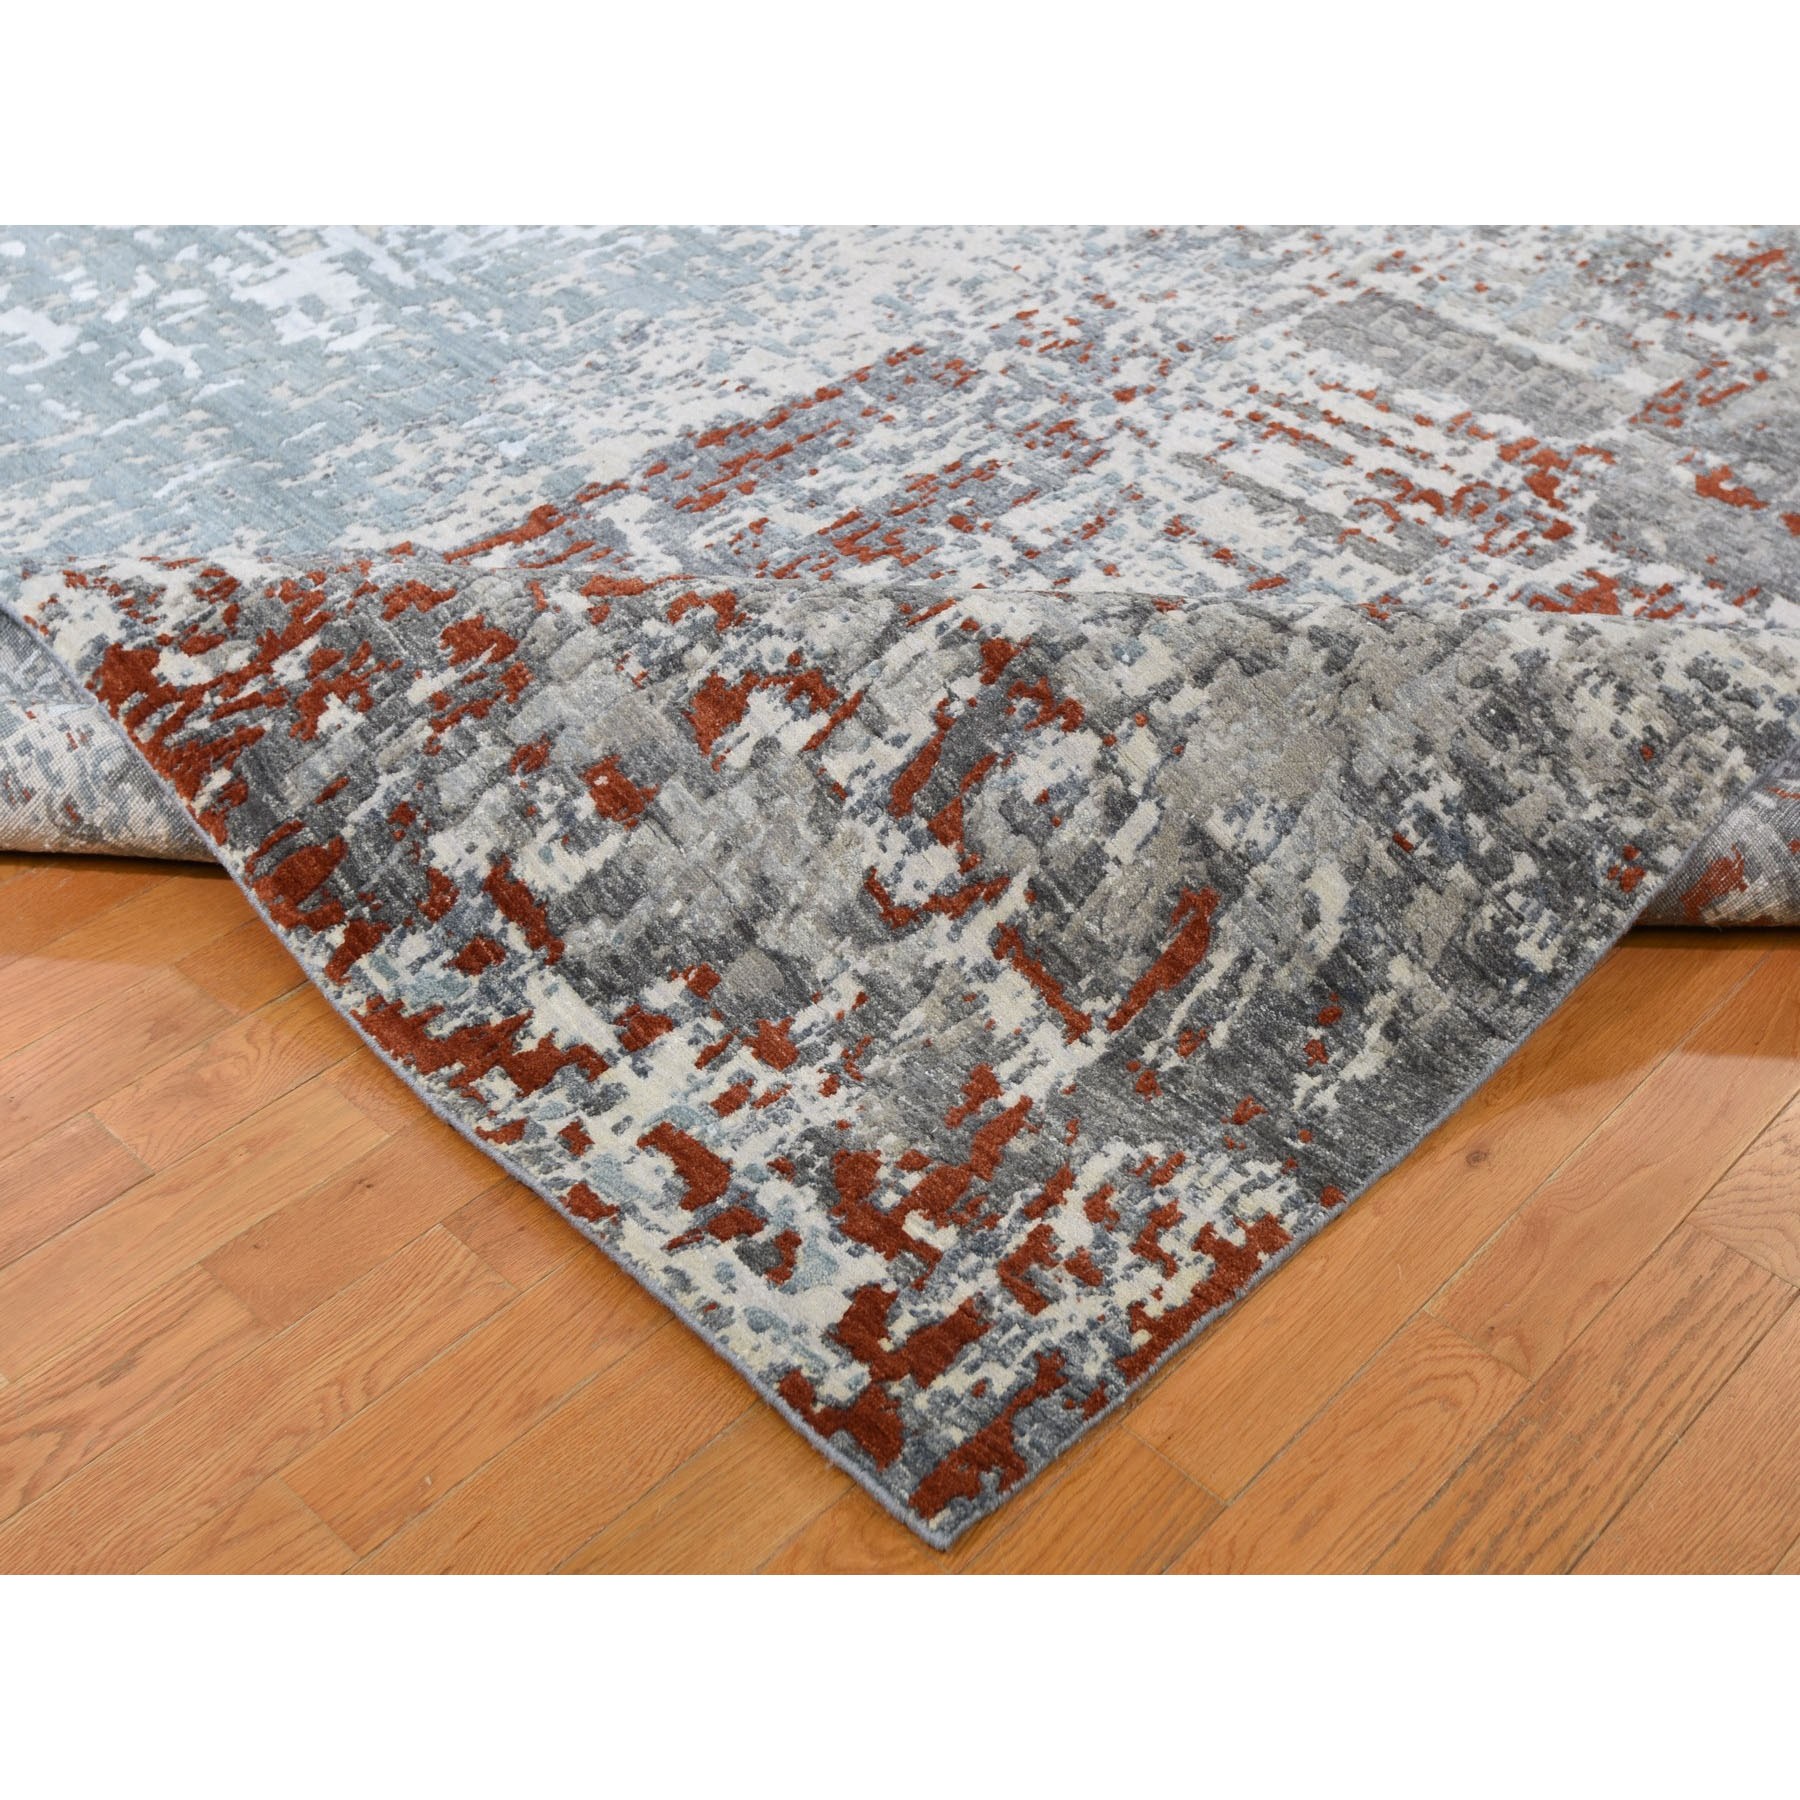 9-10 x14-7  Terracotta Abstract Design Wool and Silk Hi-Low Pile Denser Weave Hand Knotted Oriental Rug 